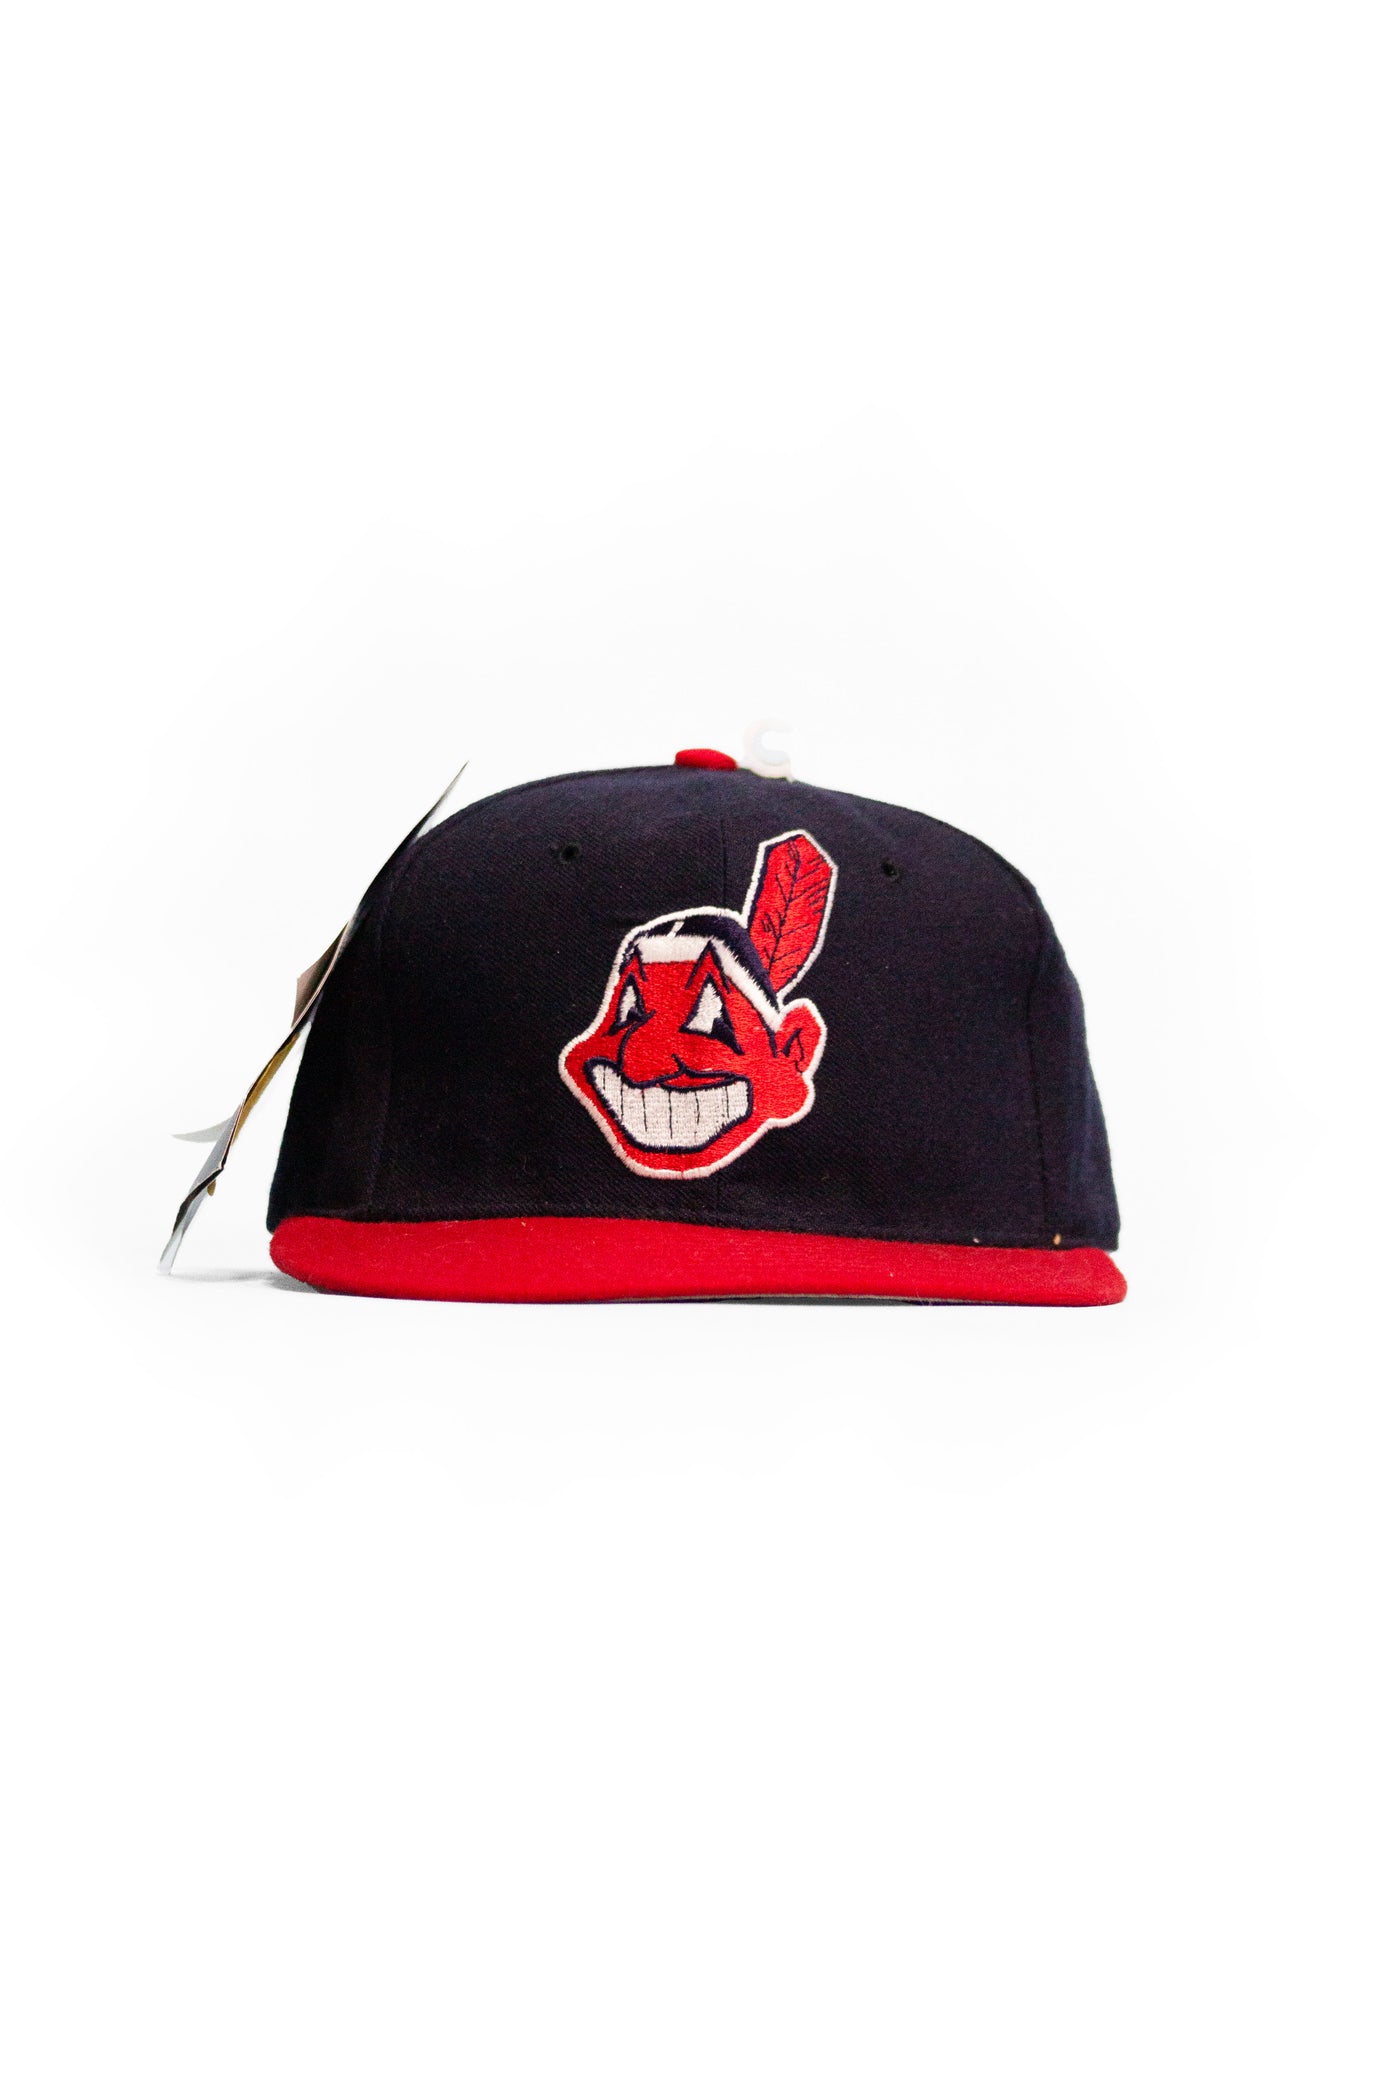 Vintage 90s New Era Cleveland Indians Fitted Hat